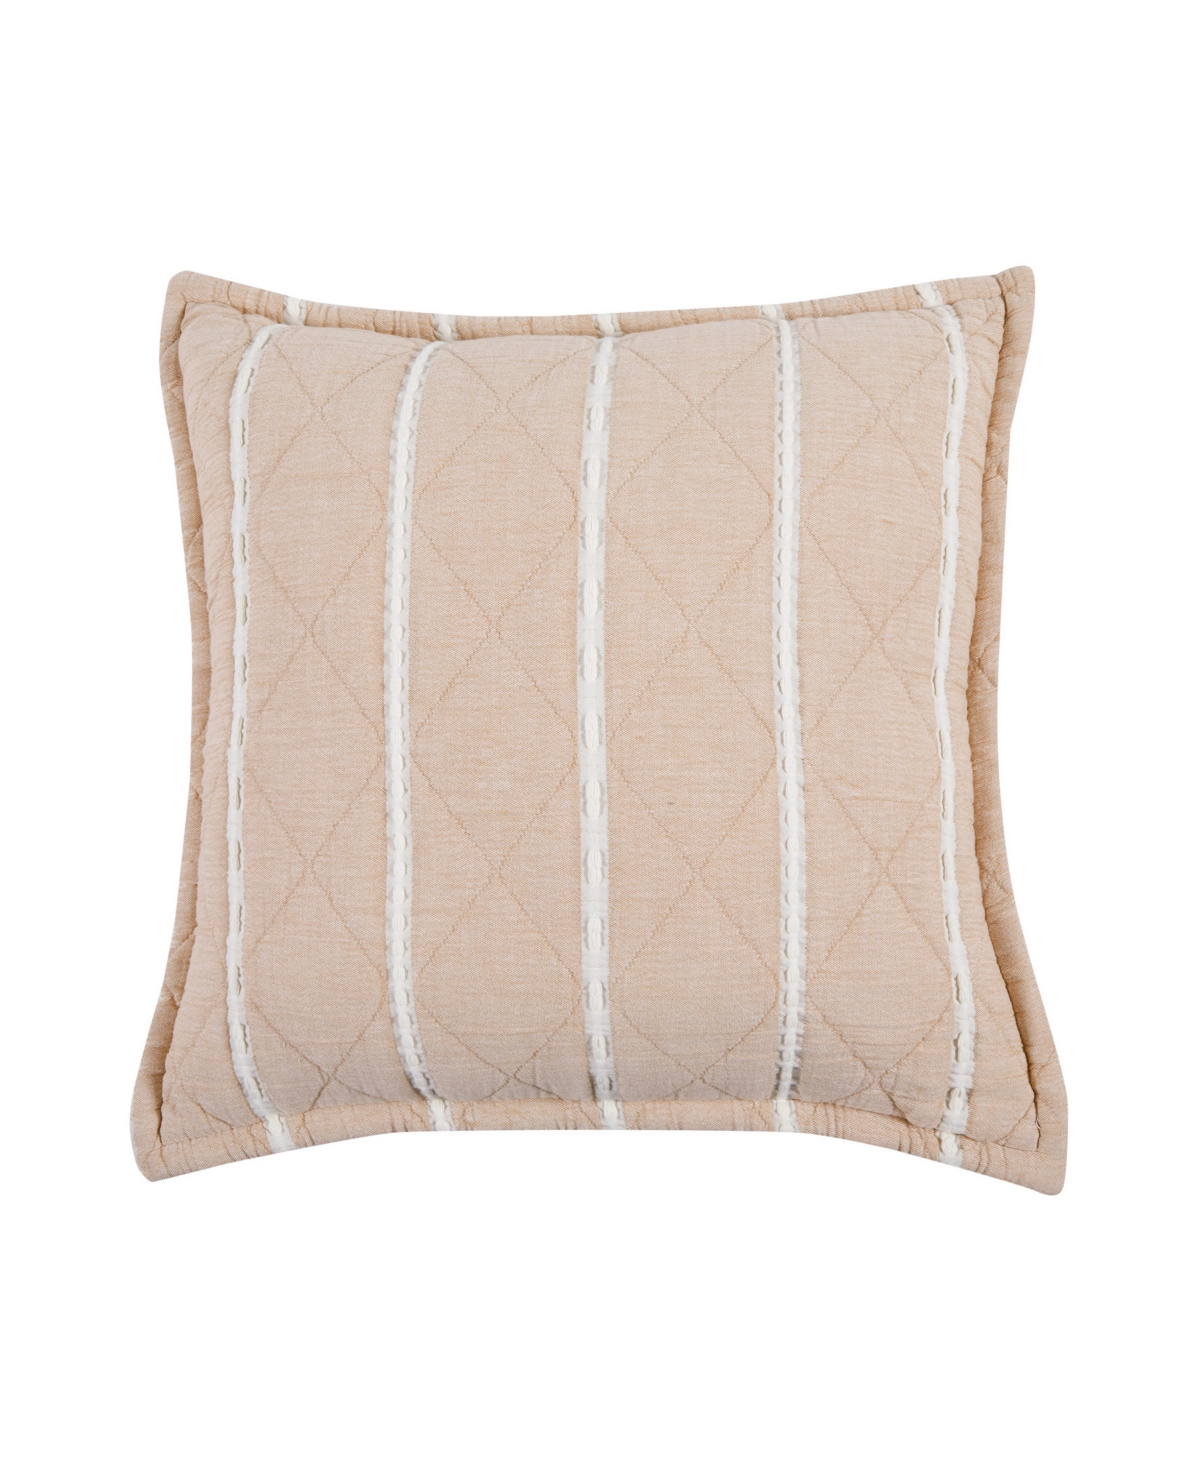 White Sand Playa Square Decorative Pillow Cover, 20" X 20" In Terracotta